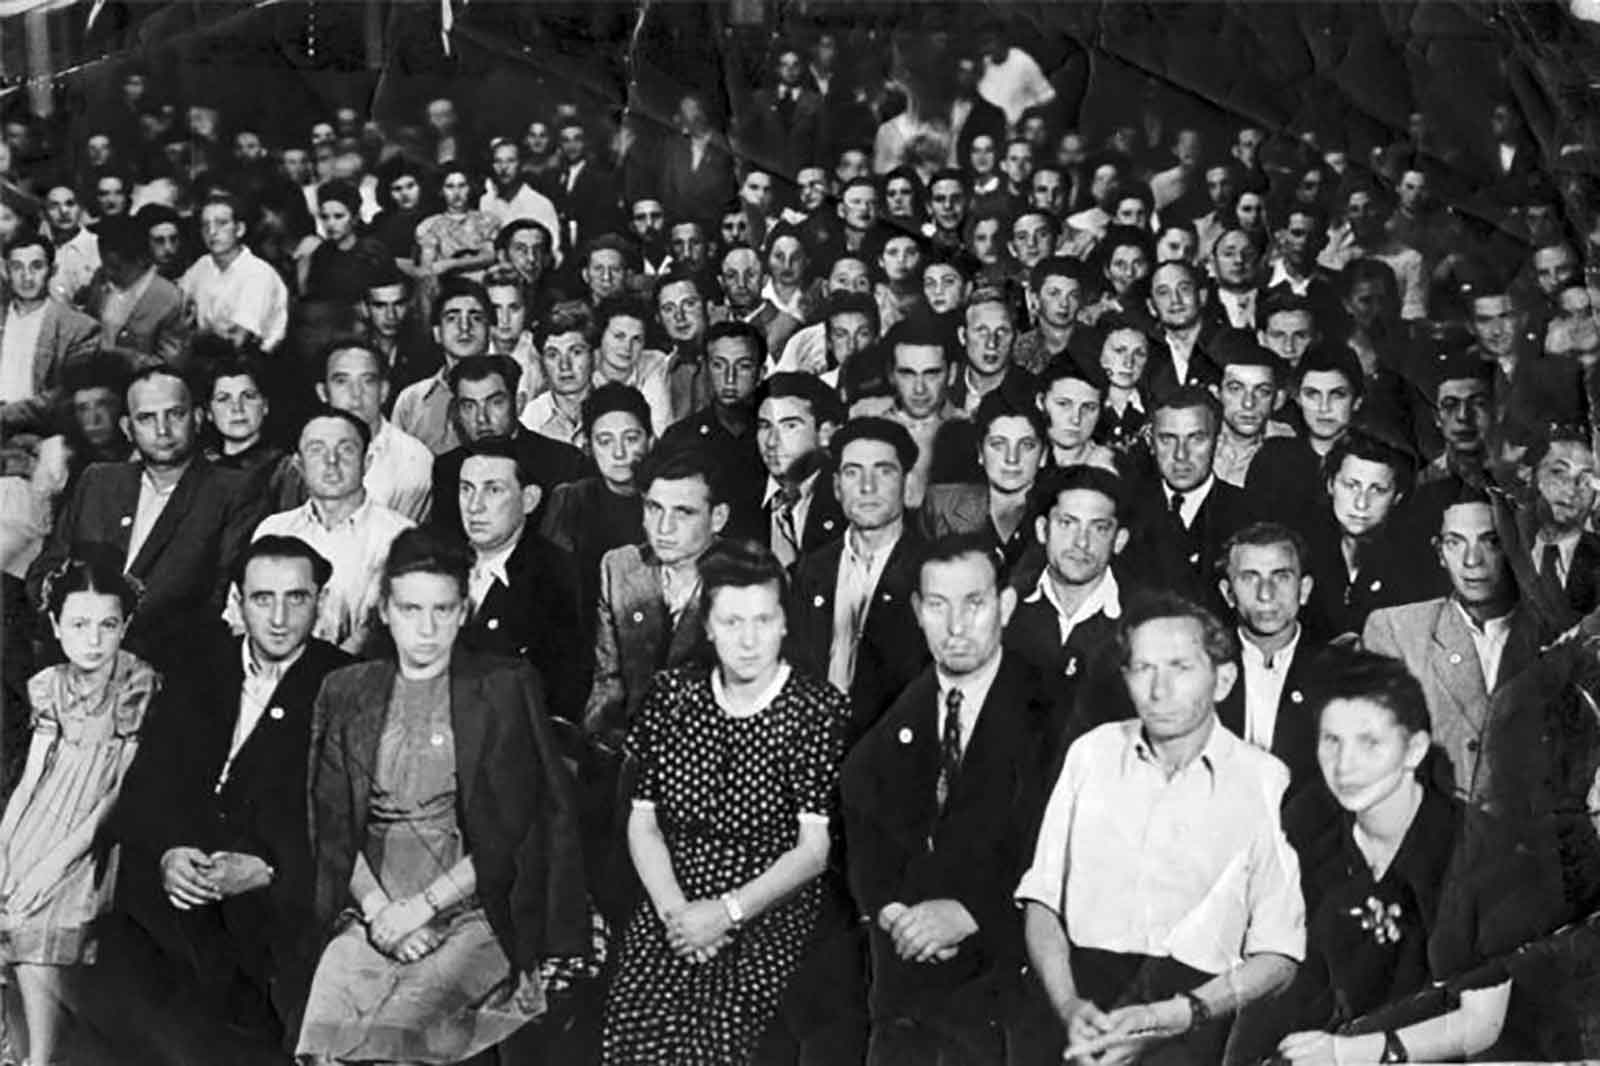 A public of men and women from the end of 20th century